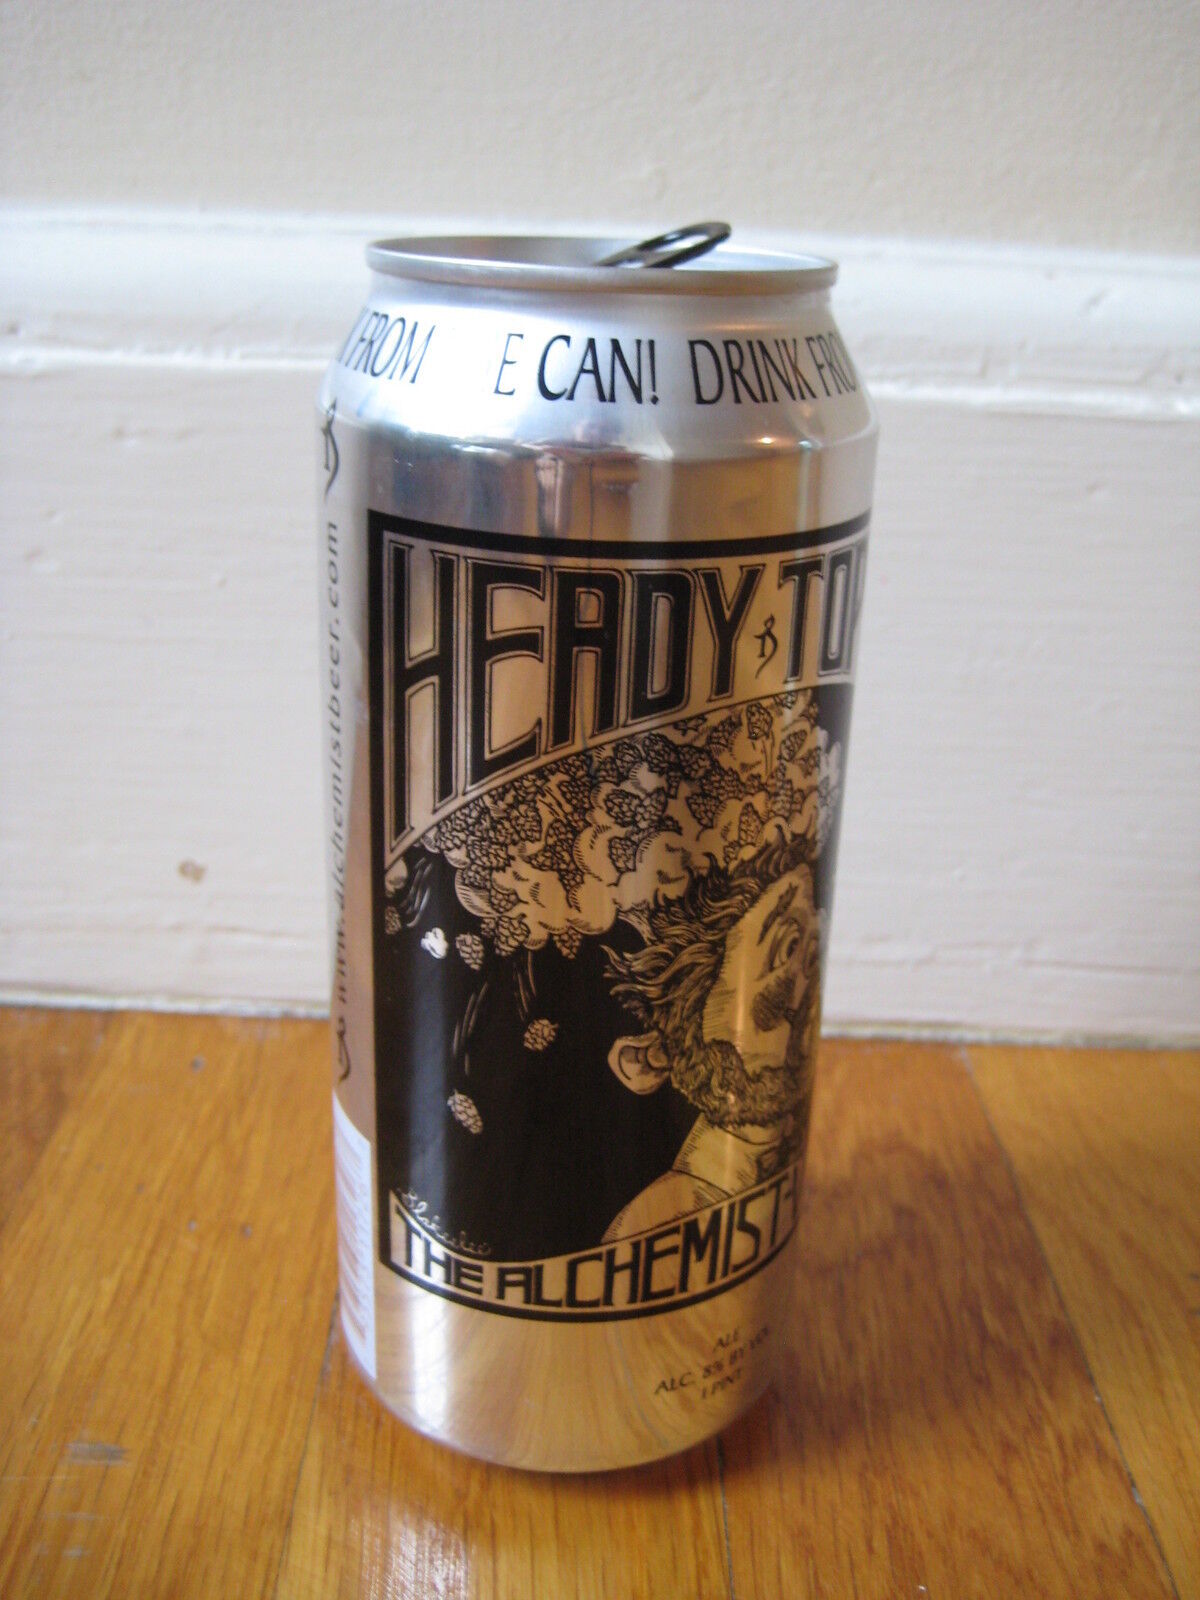 Heady Topper IPA beer CAN empty The Alchemist Waterbury VT vermont brewery 16 oz